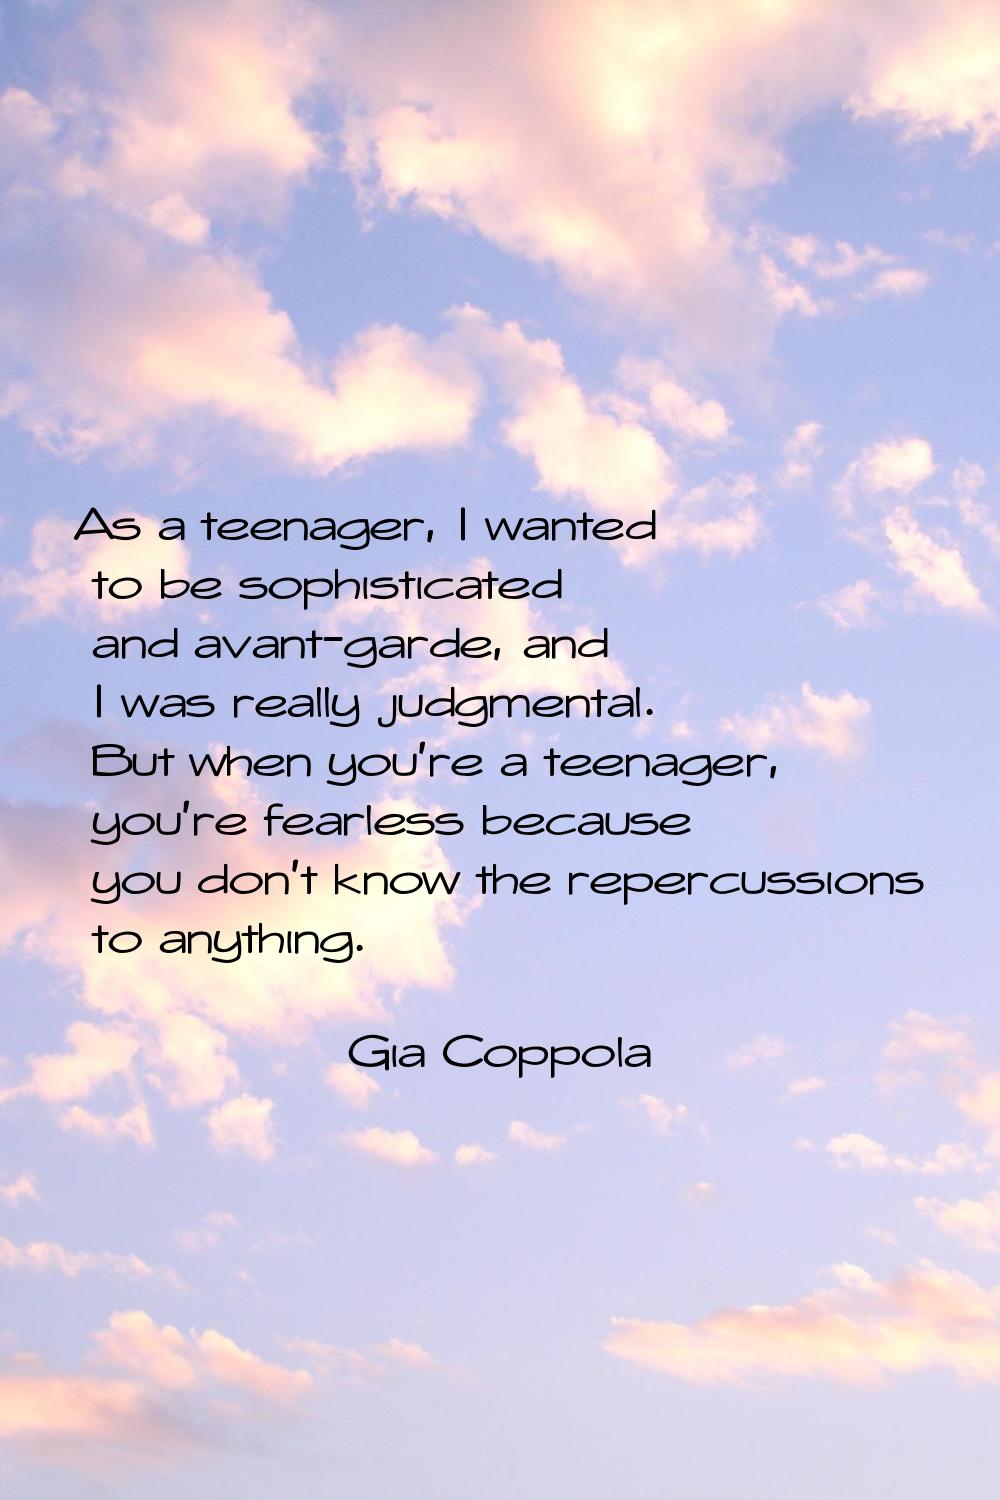 As a teenager, I wanted to be sophisticated and avant-garde, and I was really judgmental. But when 